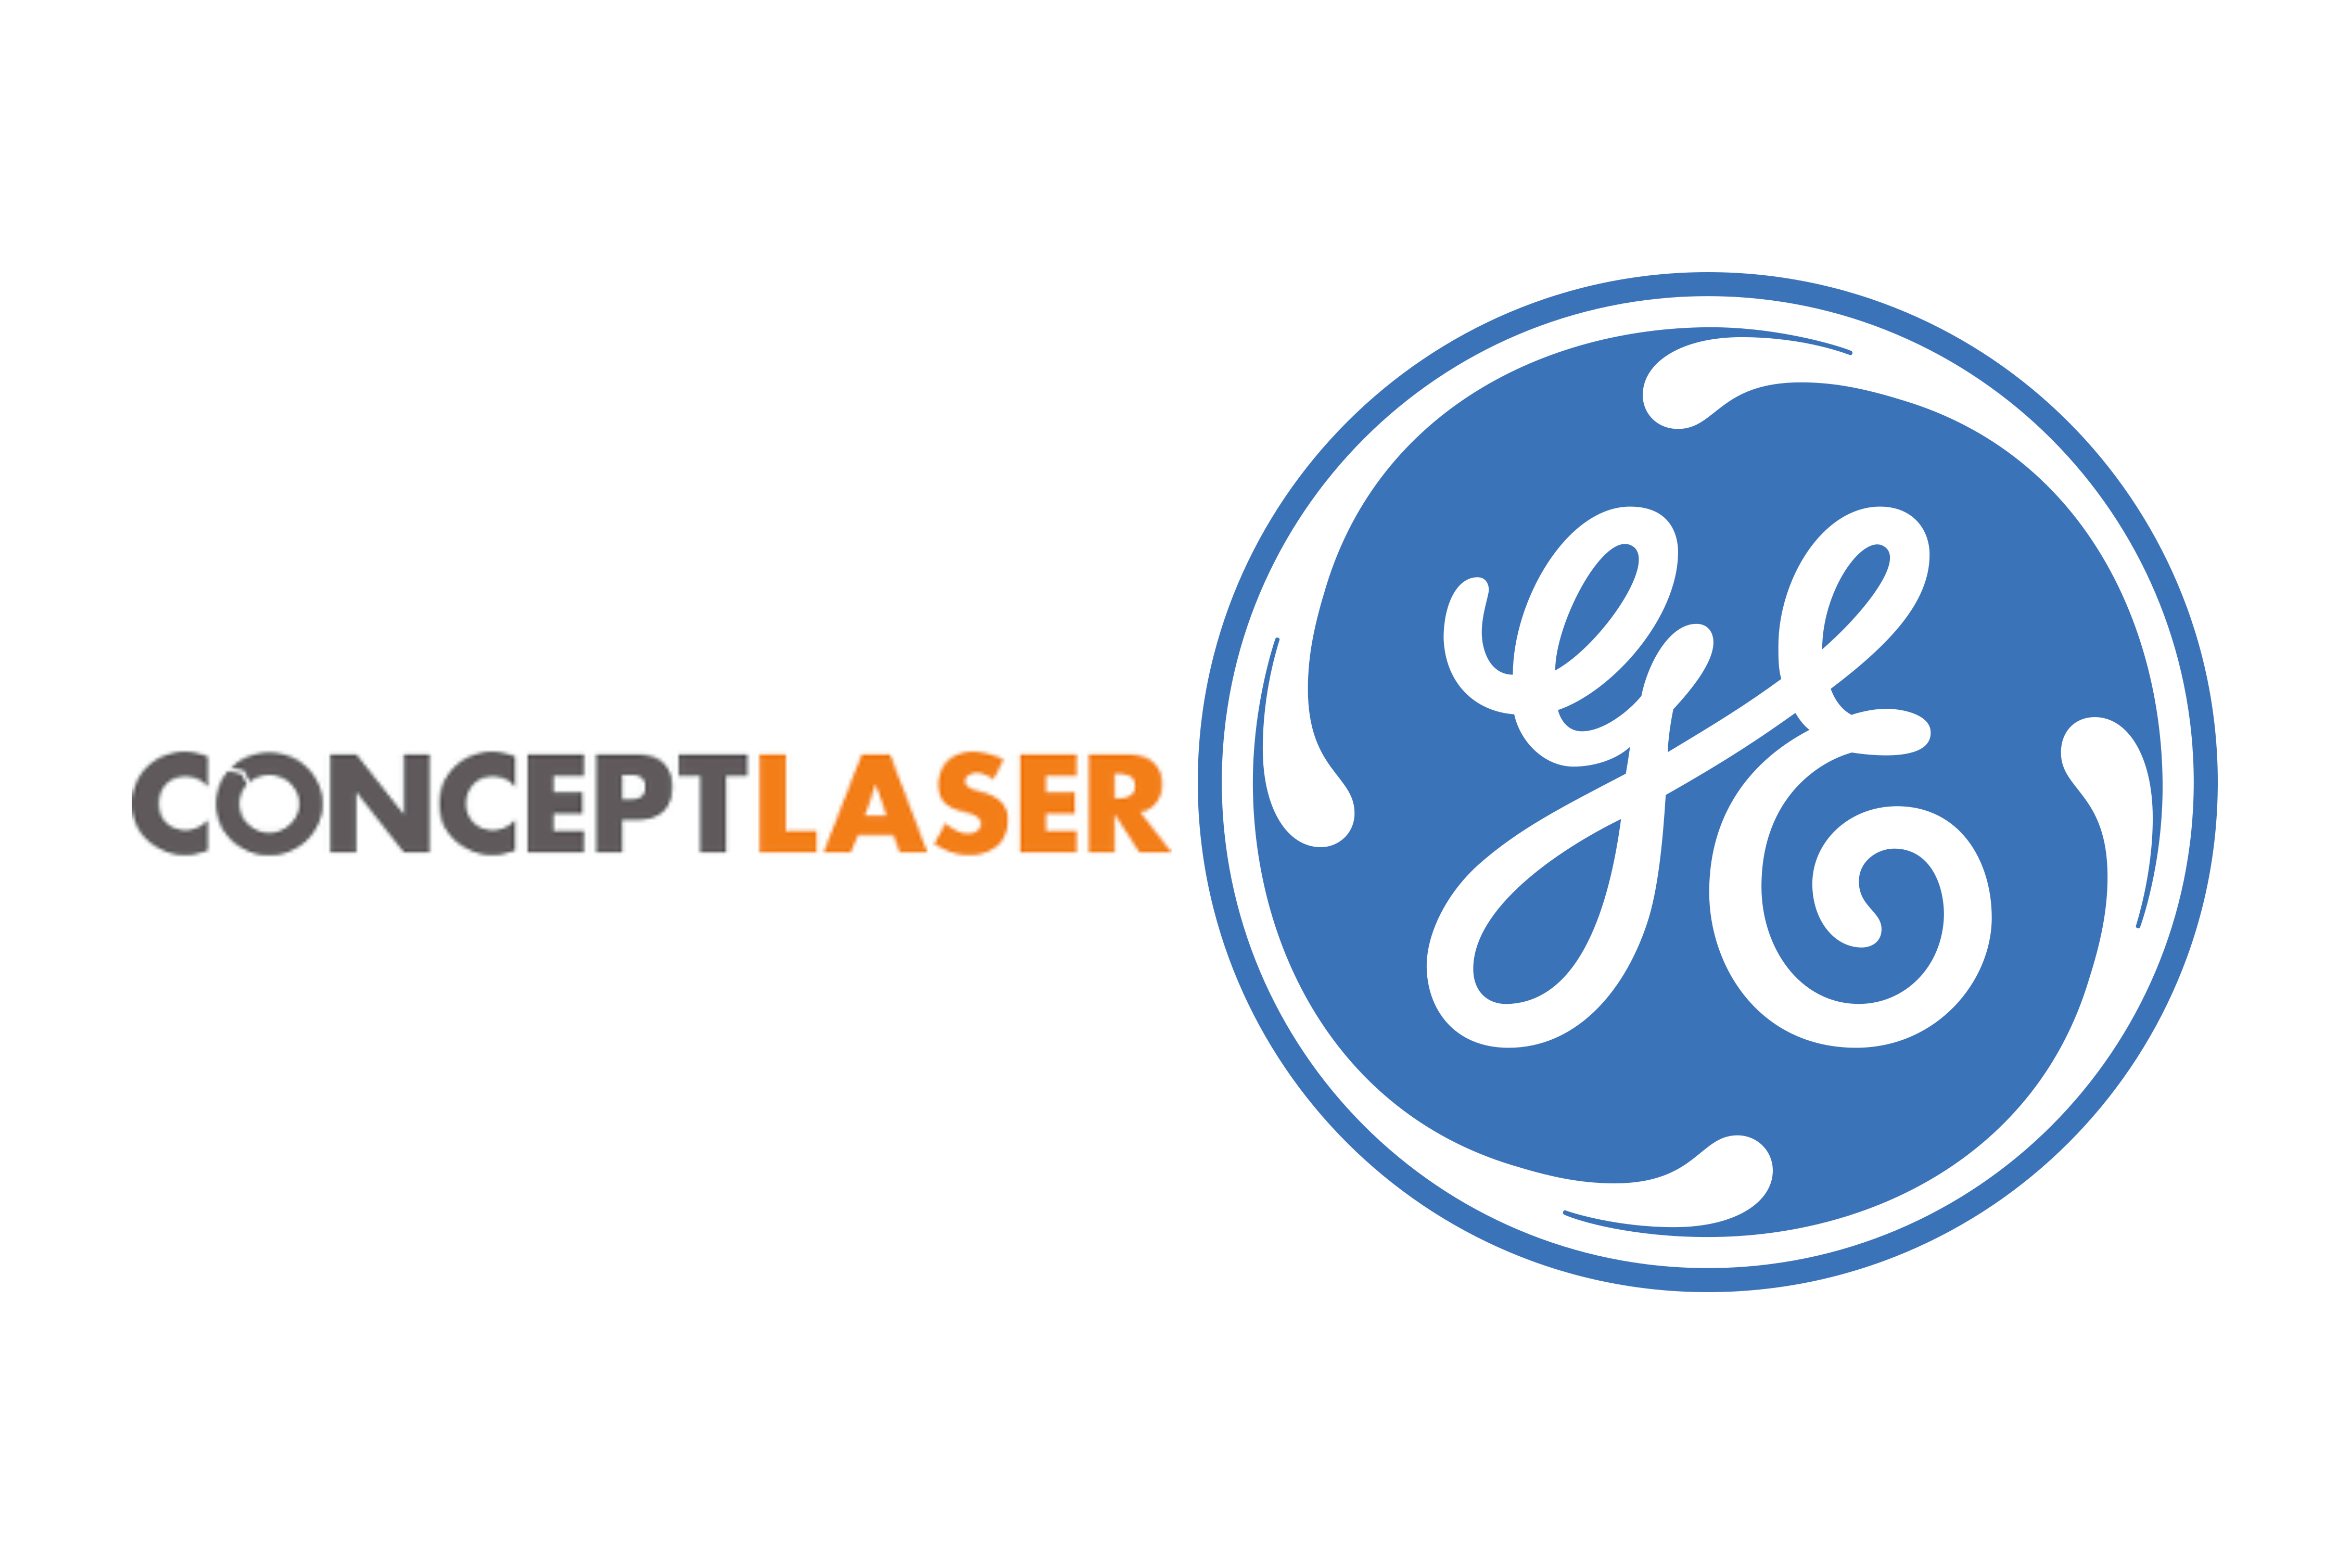  Concept Laser and GE! 